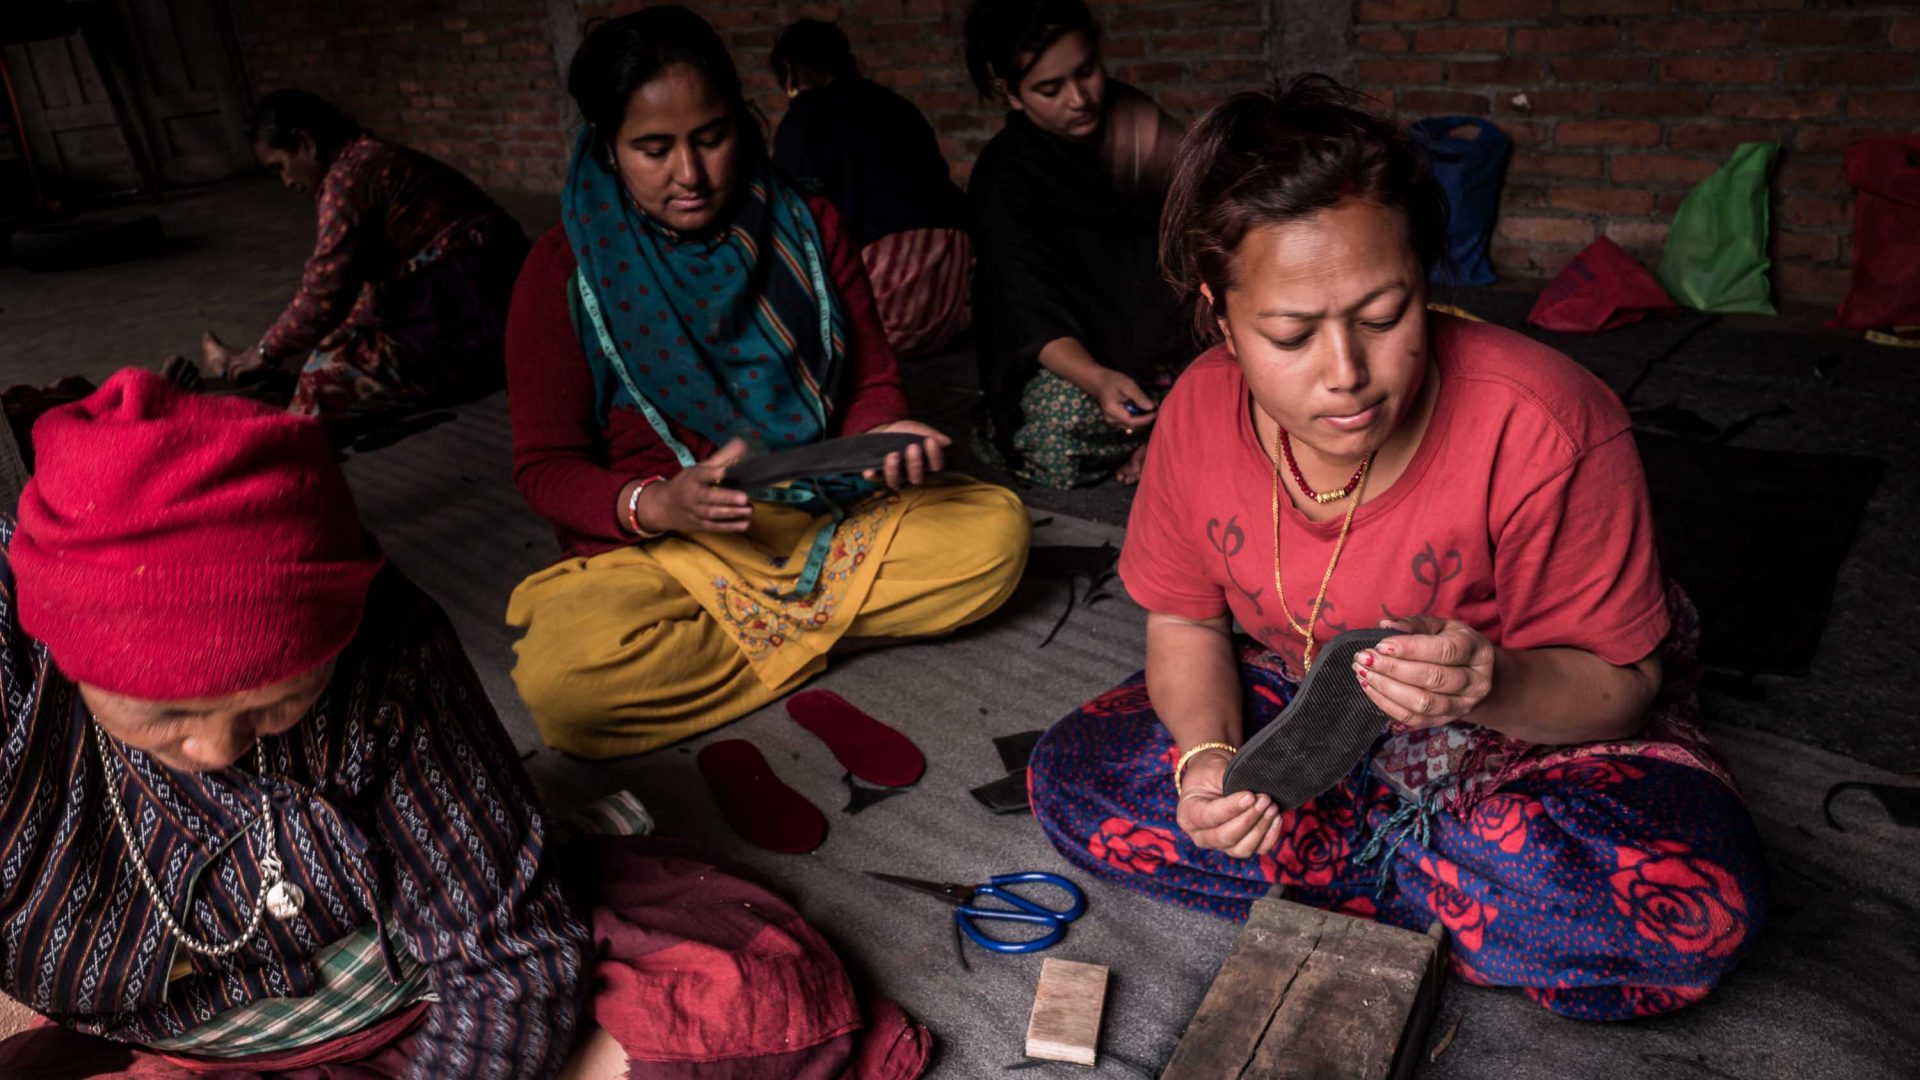 Tami Maja Maharjan and other women take part in shoe-making training designed by to help local widows acquire independence, in the Newari village of Sunakoti, Kathmandu valley.